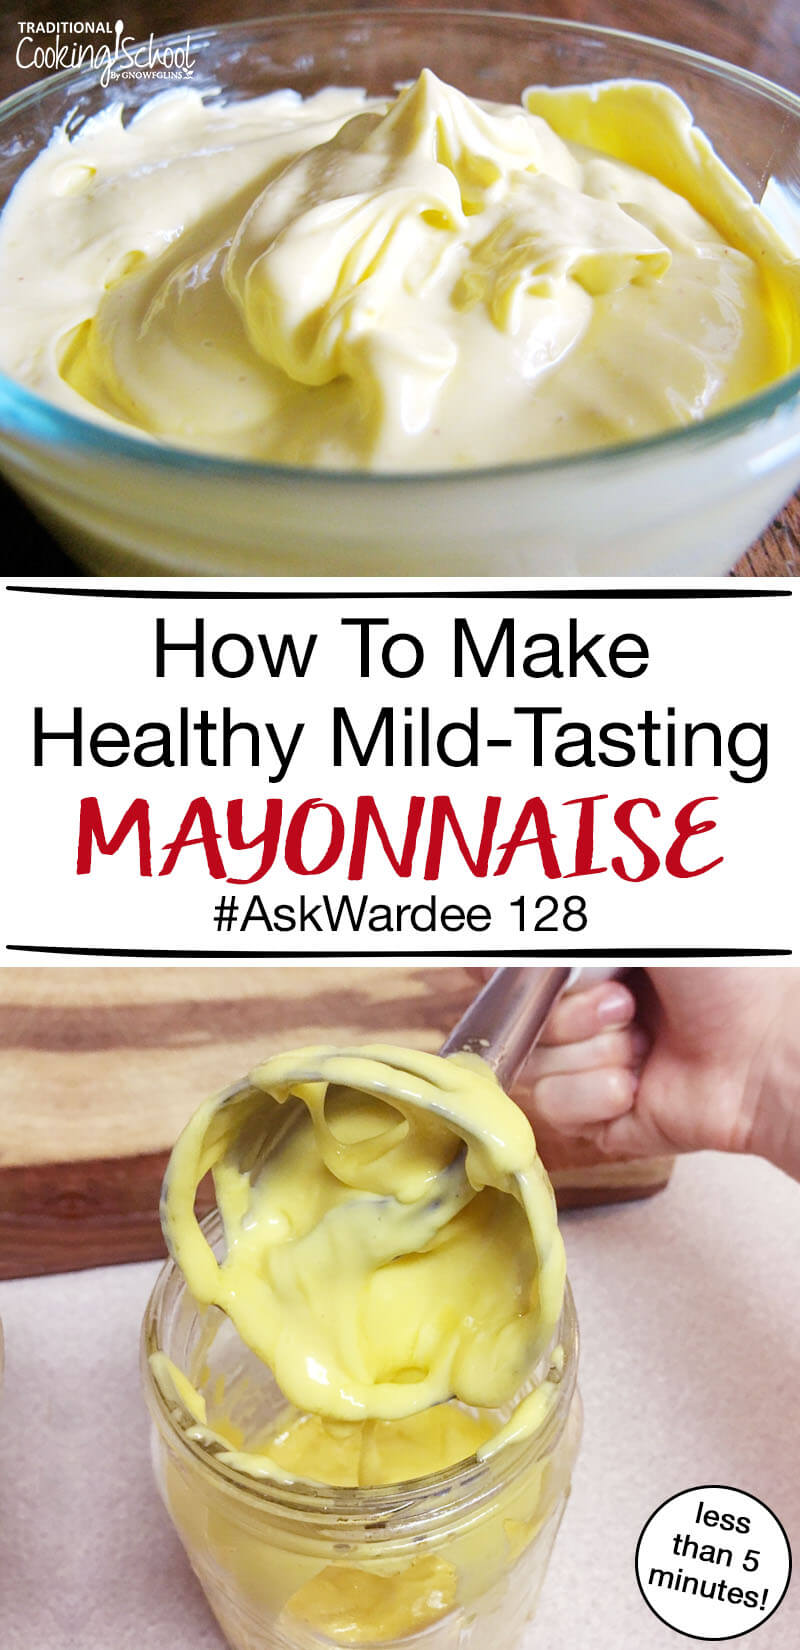 glass bowl of golden-colored homemade mayonnaise perfect for keto recipes with text overlay: "How To Make Healthy Mild-Tasting Mayonnaise #AskWardee 128 (less than 5 minutes!)"